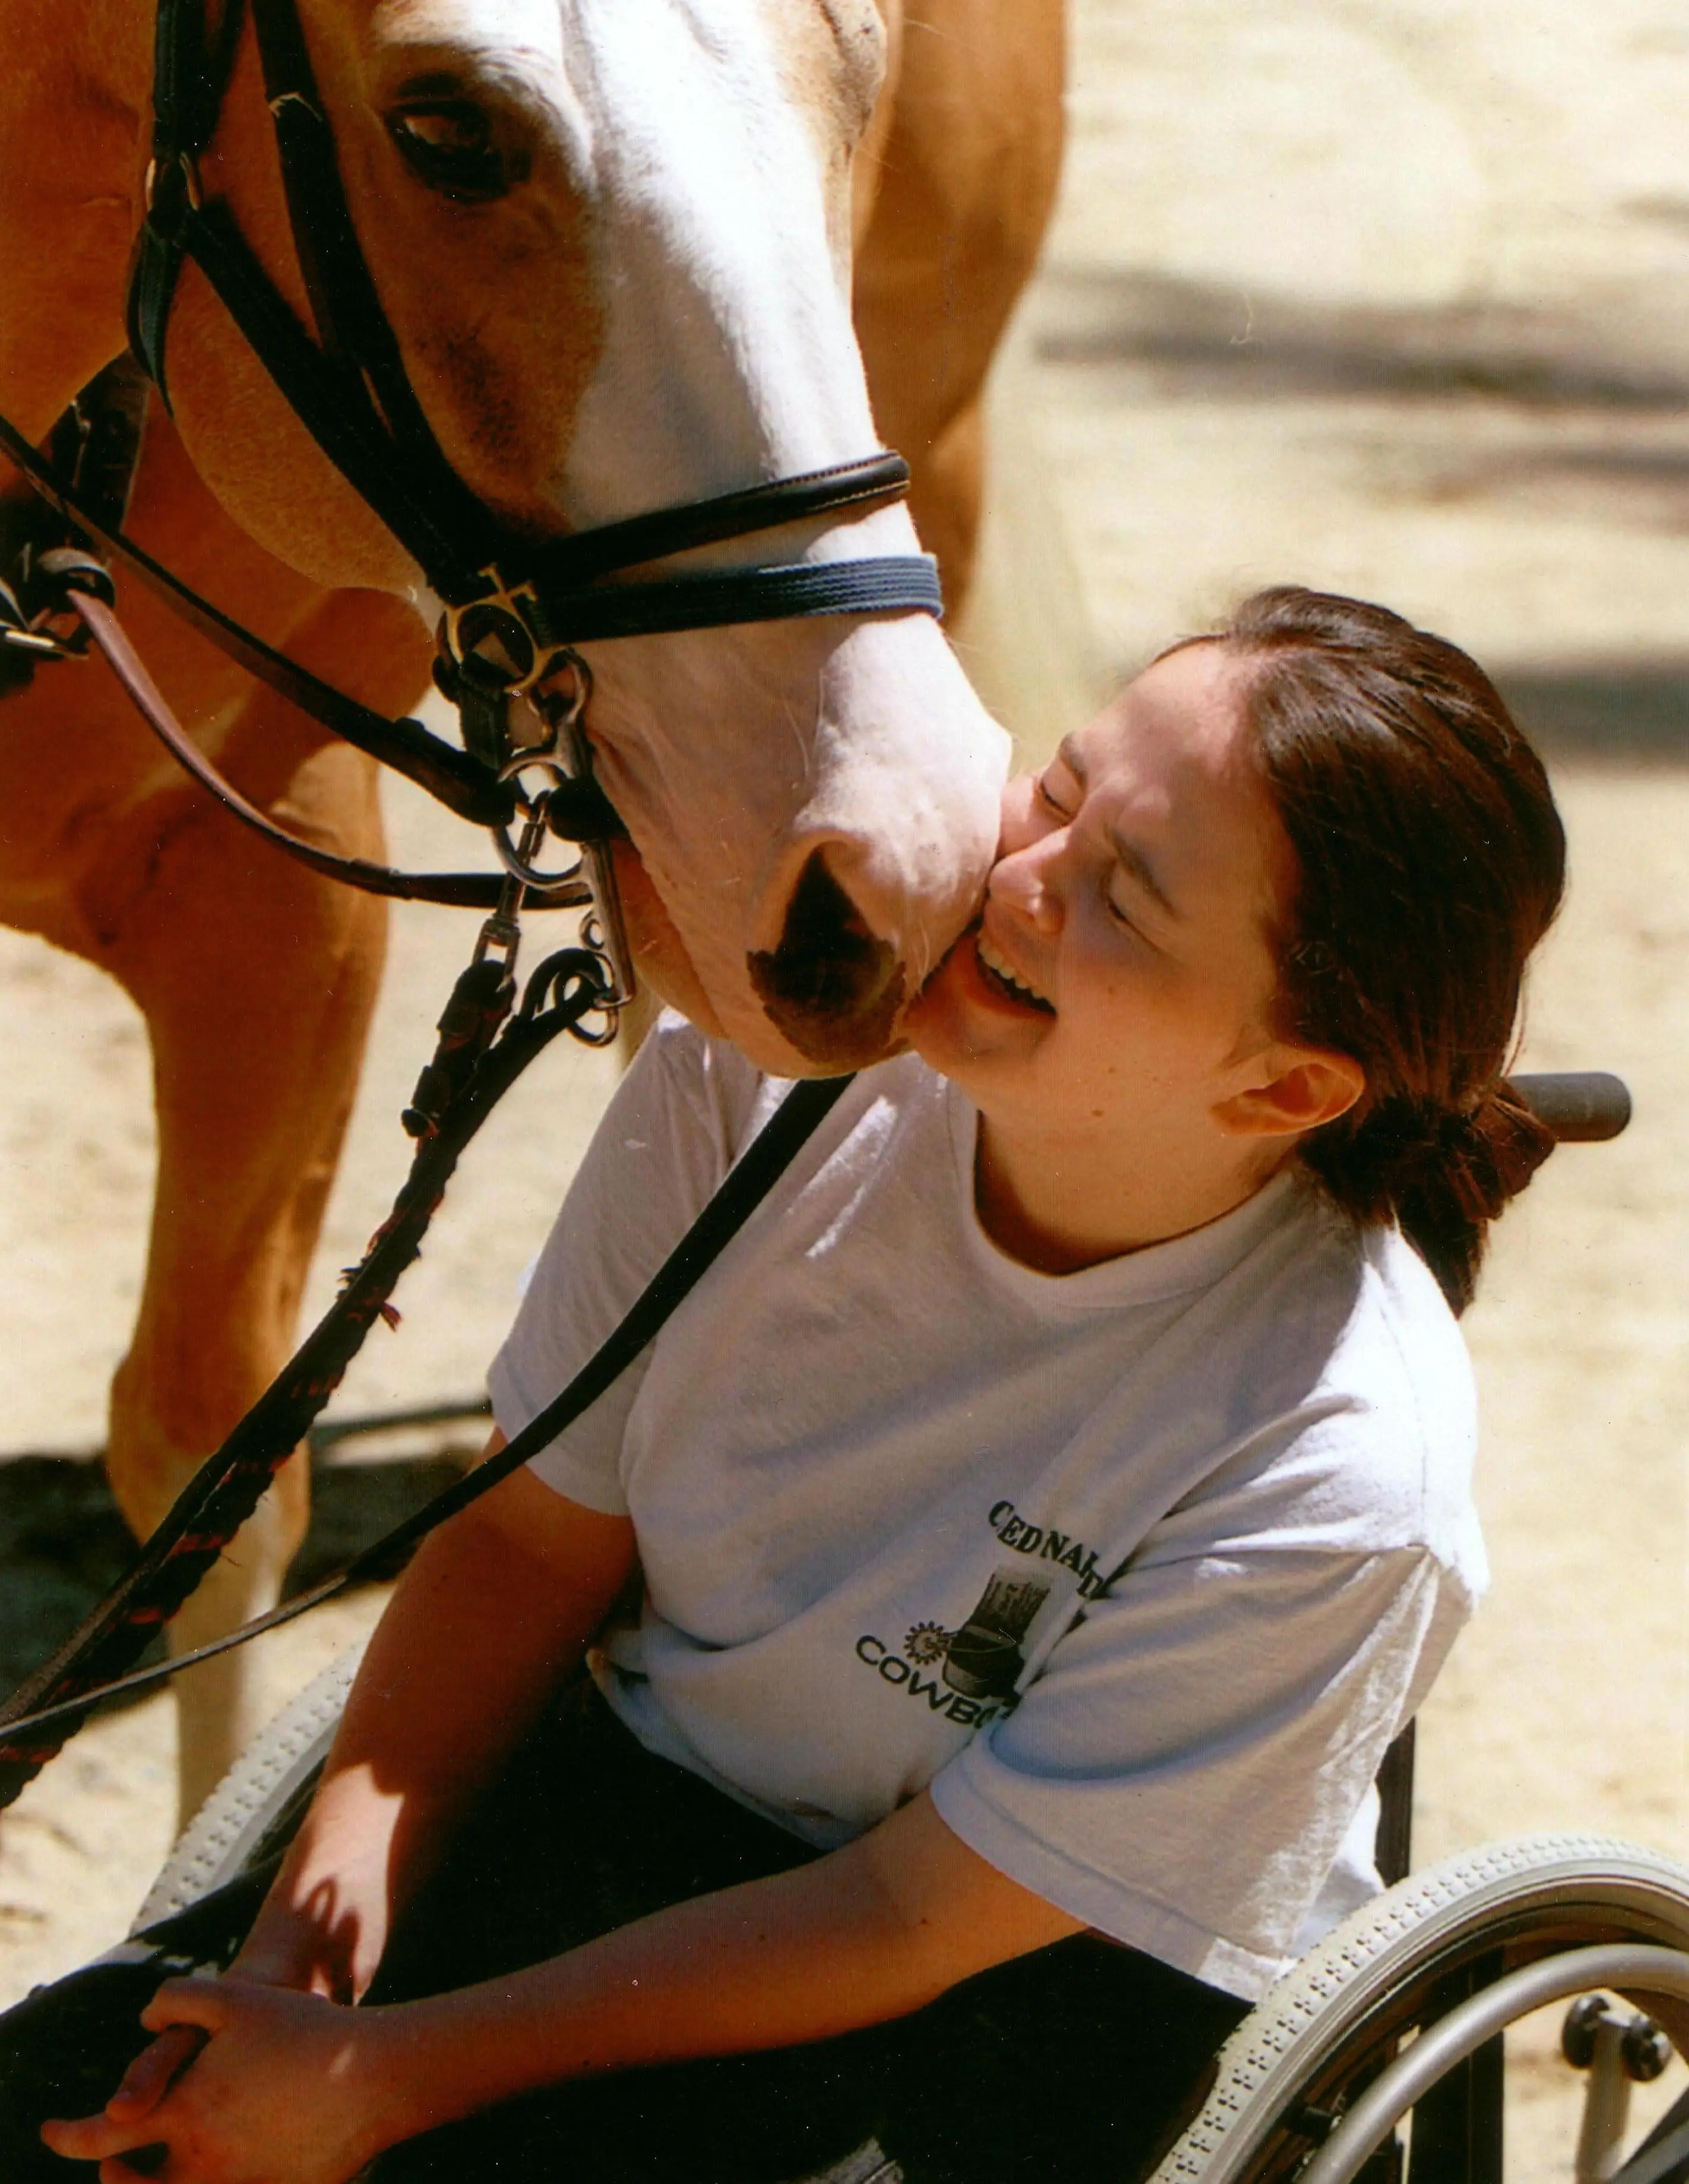 Come  help people with disabilites  ride and enjoy our horses!